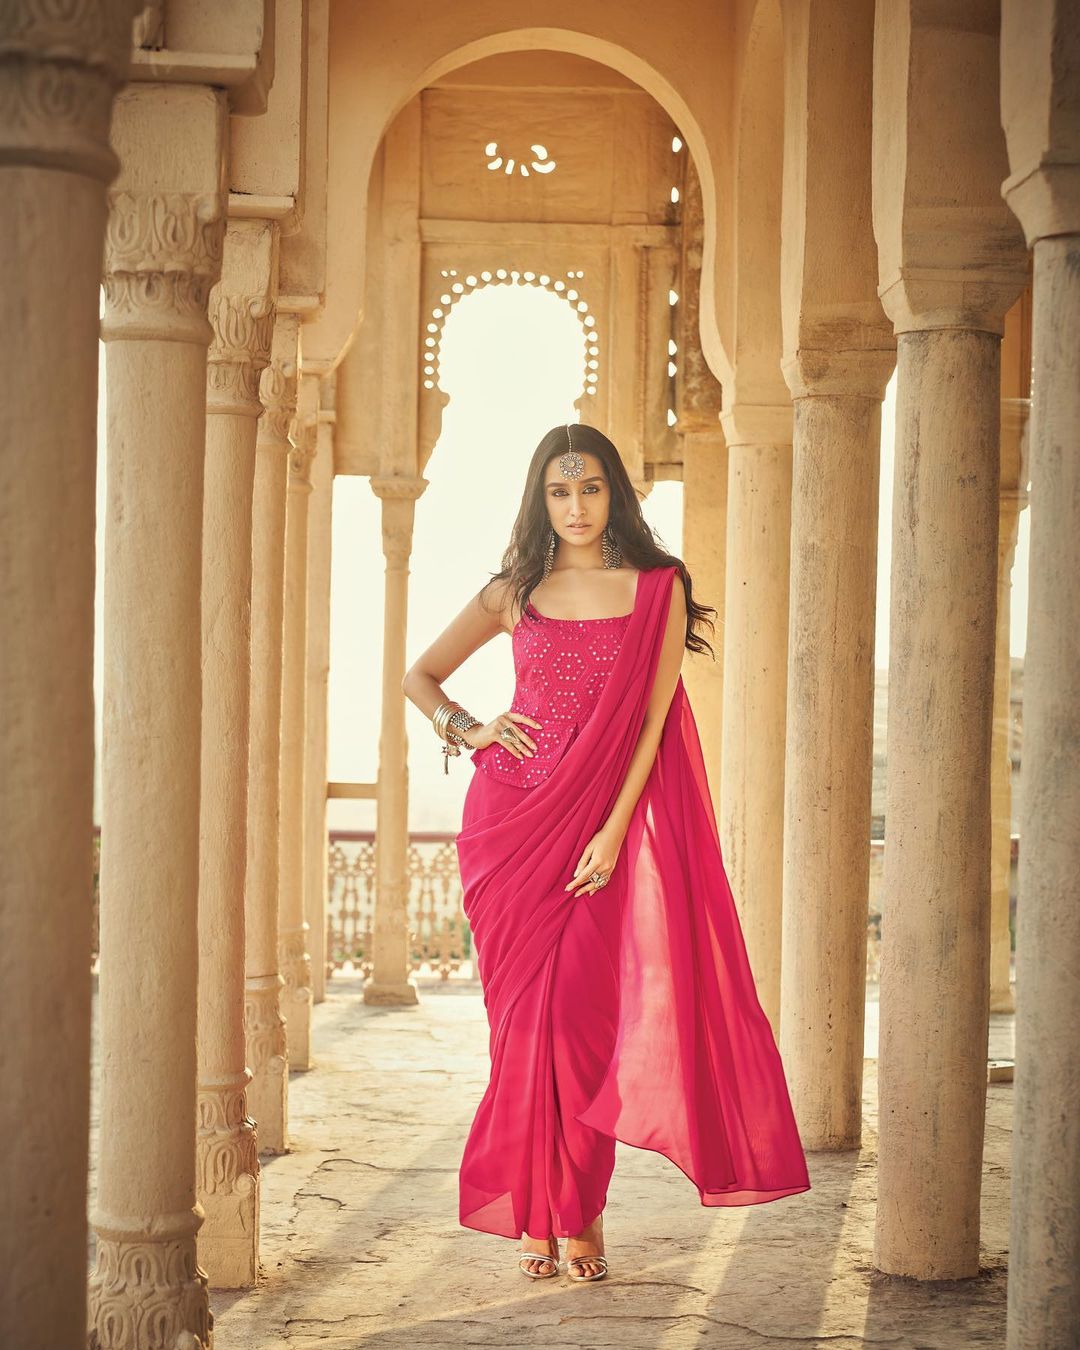 Shraddha Kapoor looks a vision in the pink plain saree.